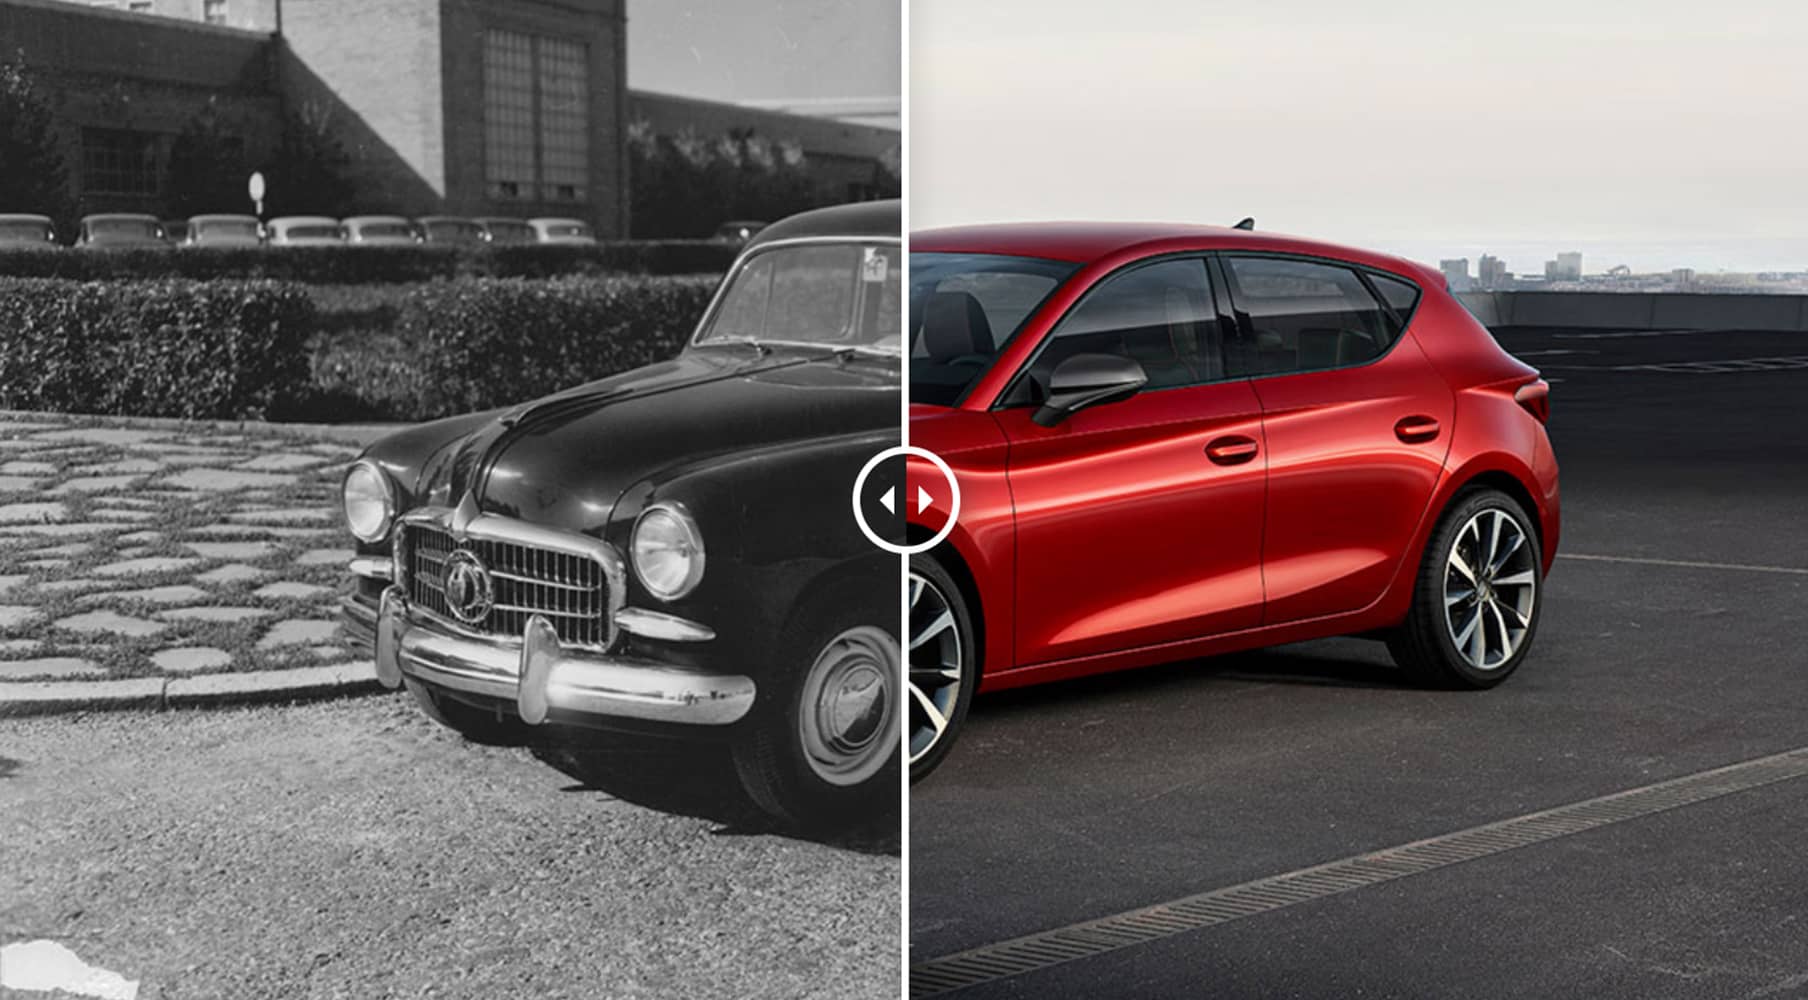 70 years in contrast.First model versus the latest.